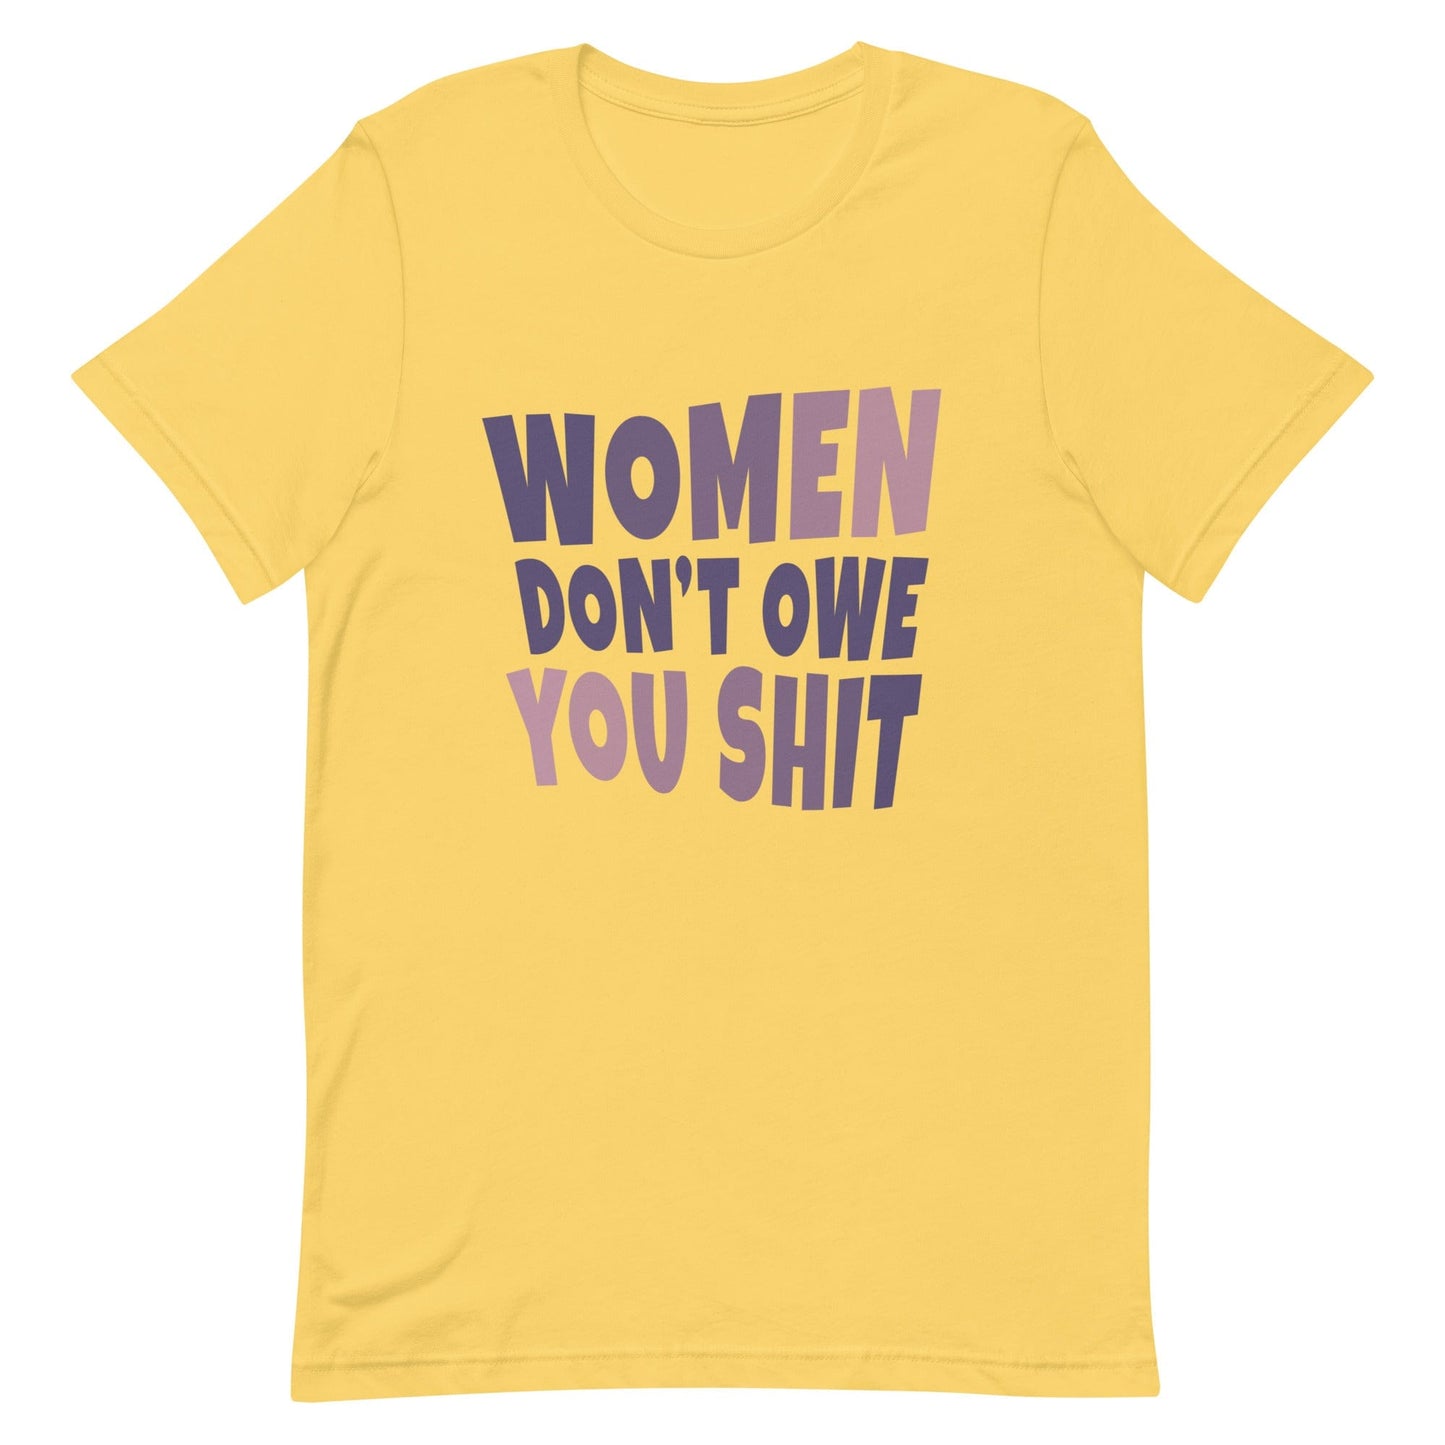 feminist-t-shirt-quote-women-don´t-owe-you-shit-yellow-at-feminist-define-front